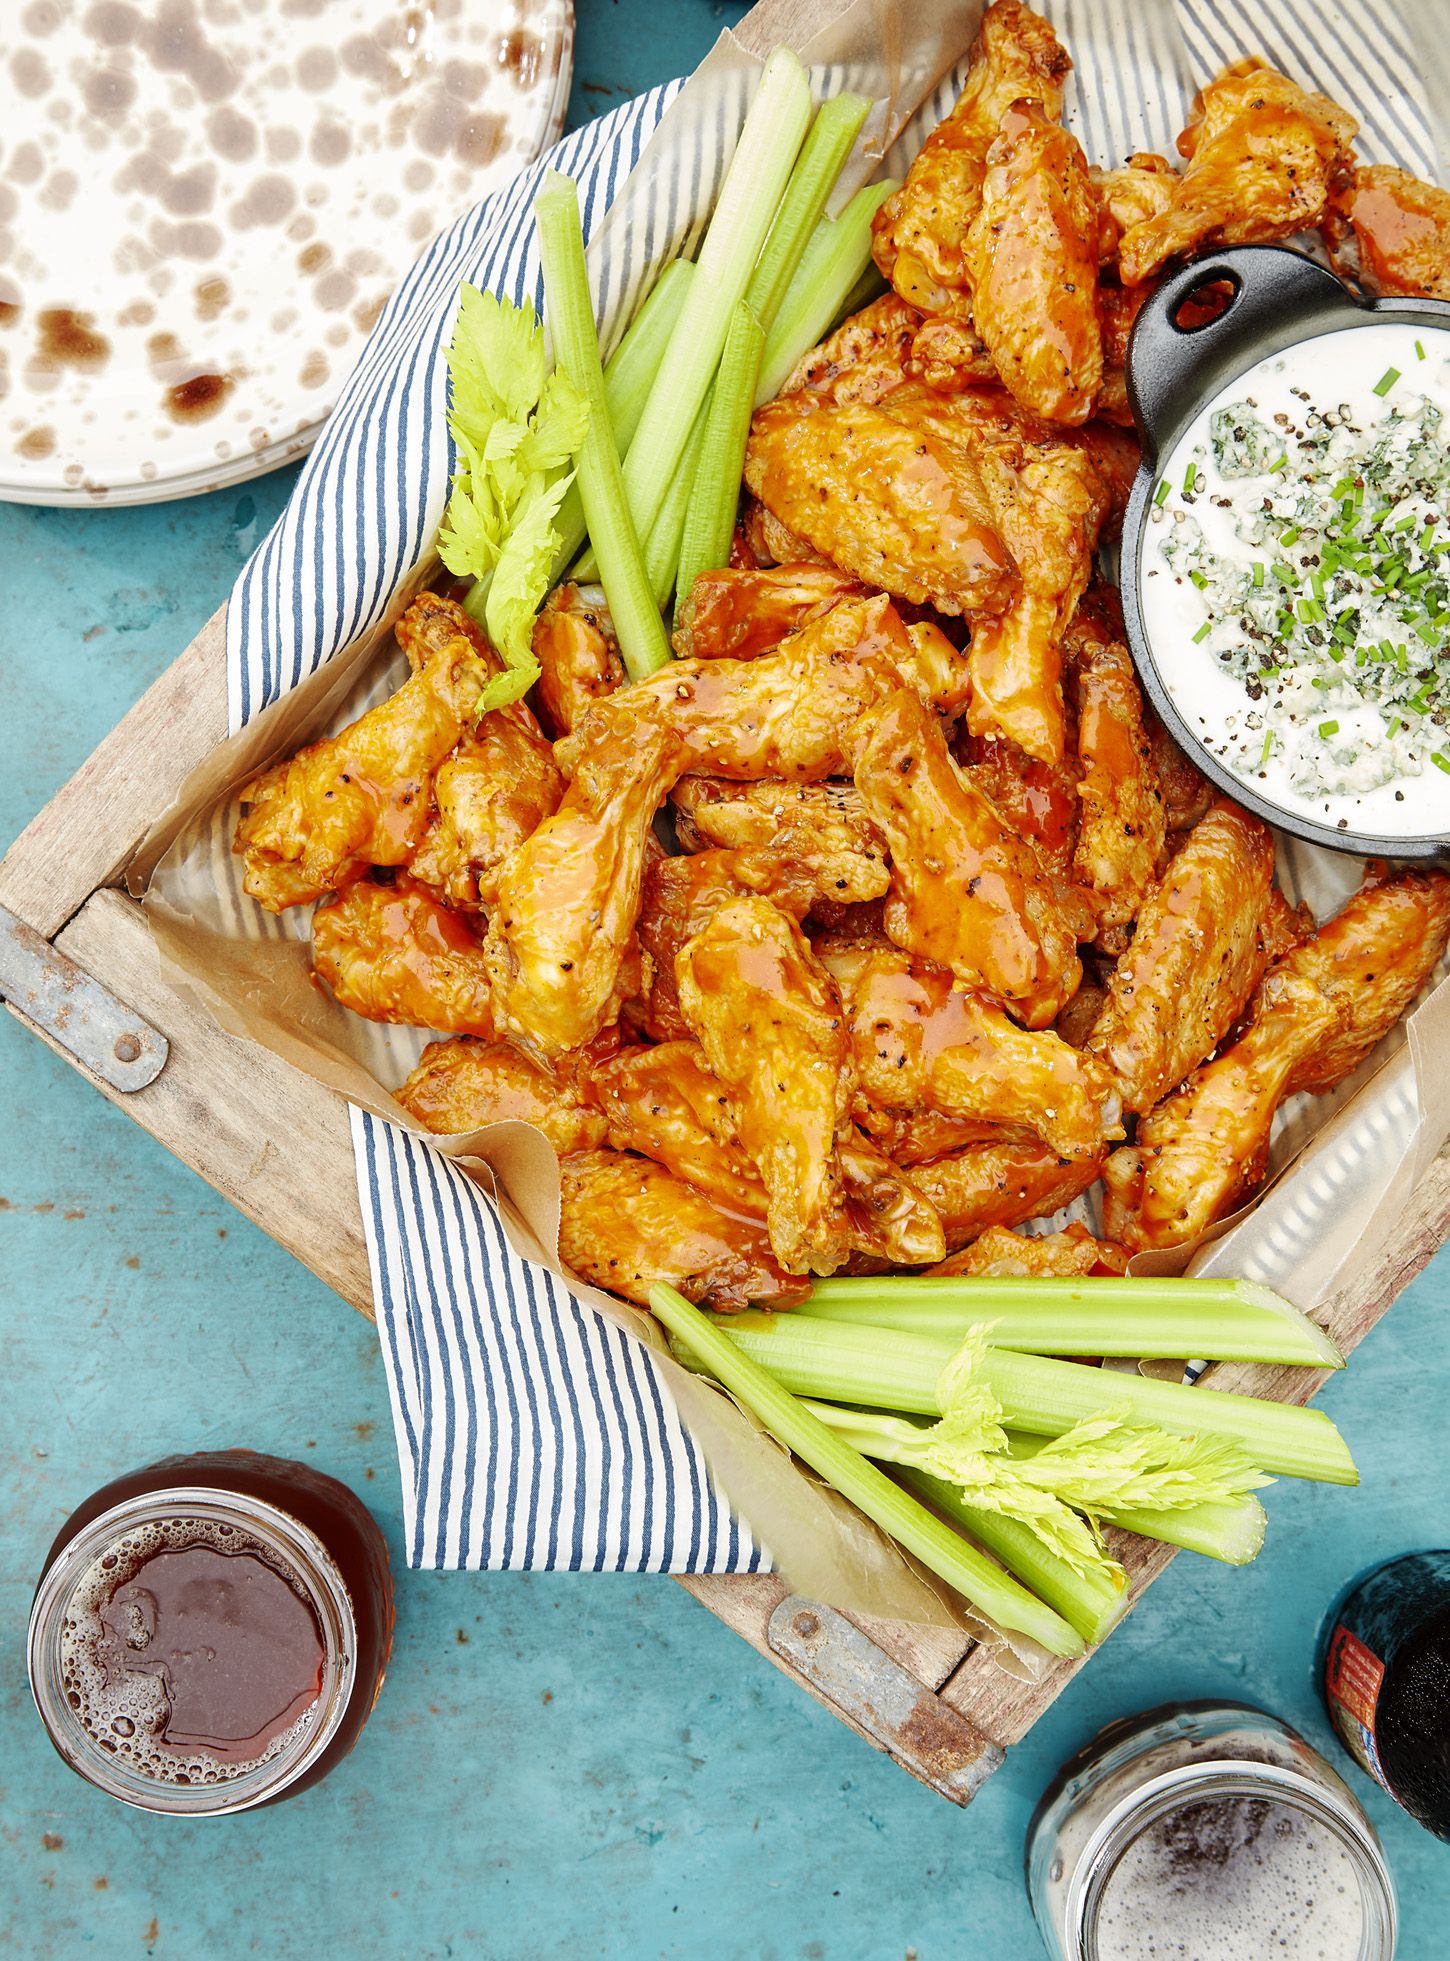 Best Spicy Wings With Blue Cheese Dip - How to Make Spicy Oven-Baked With Blue Cheese Dip